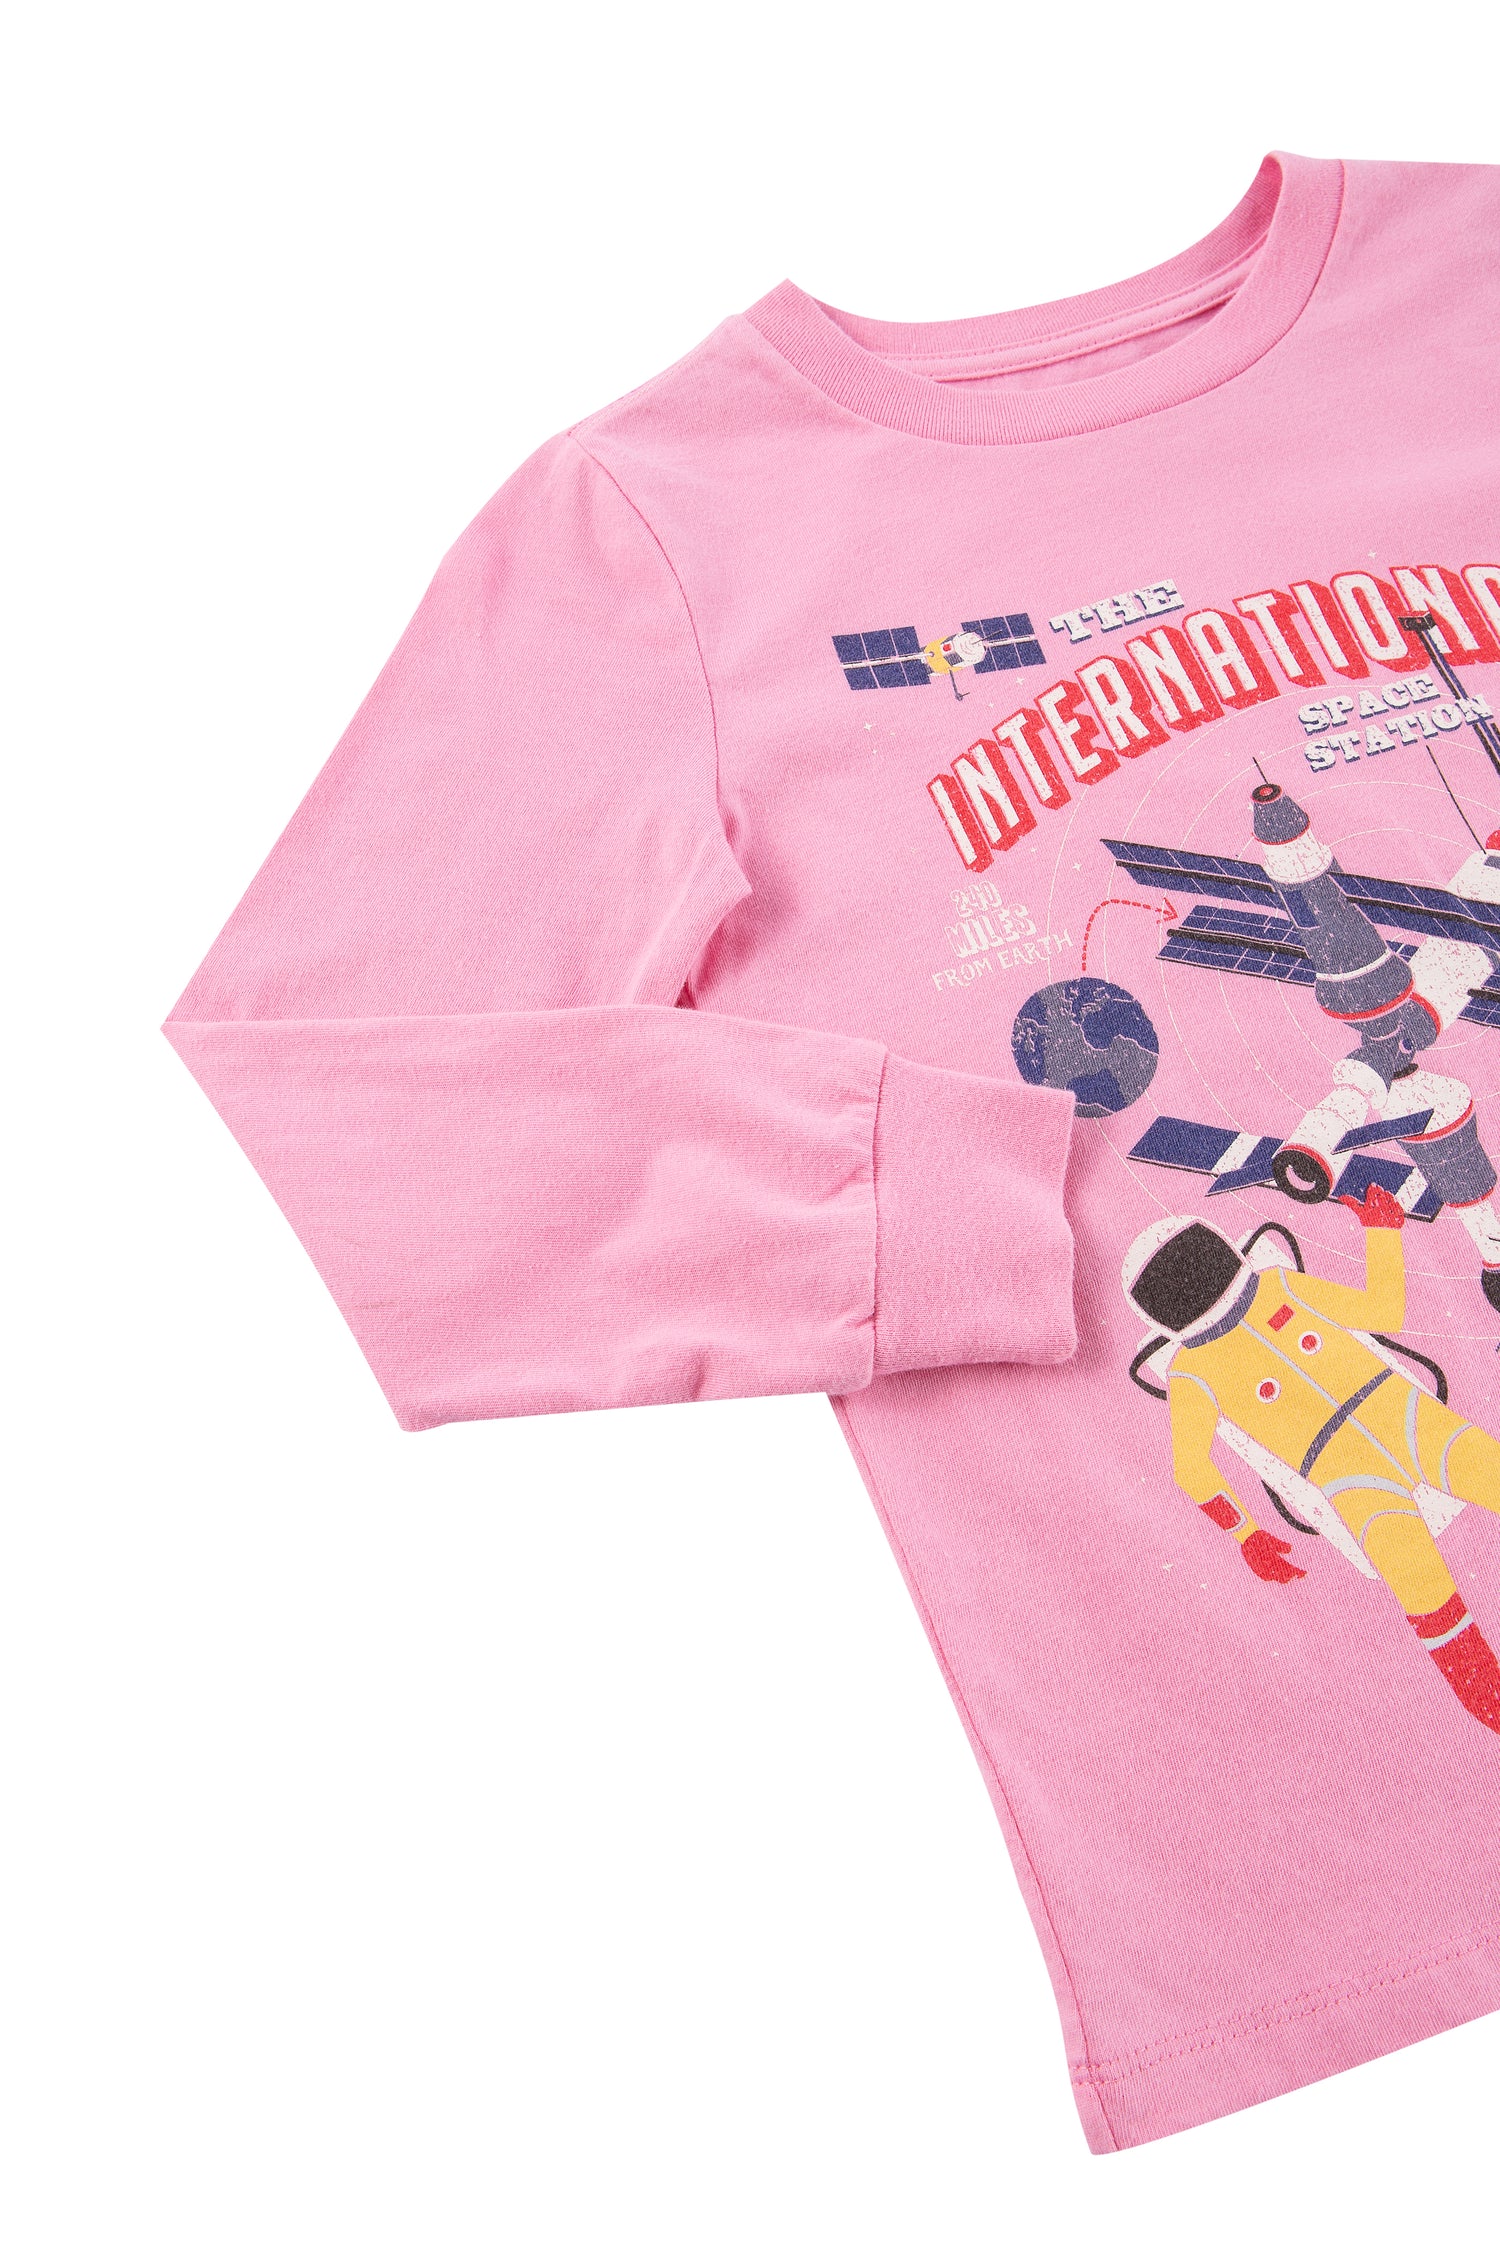 Close up view of pink space themed sweatshirt 